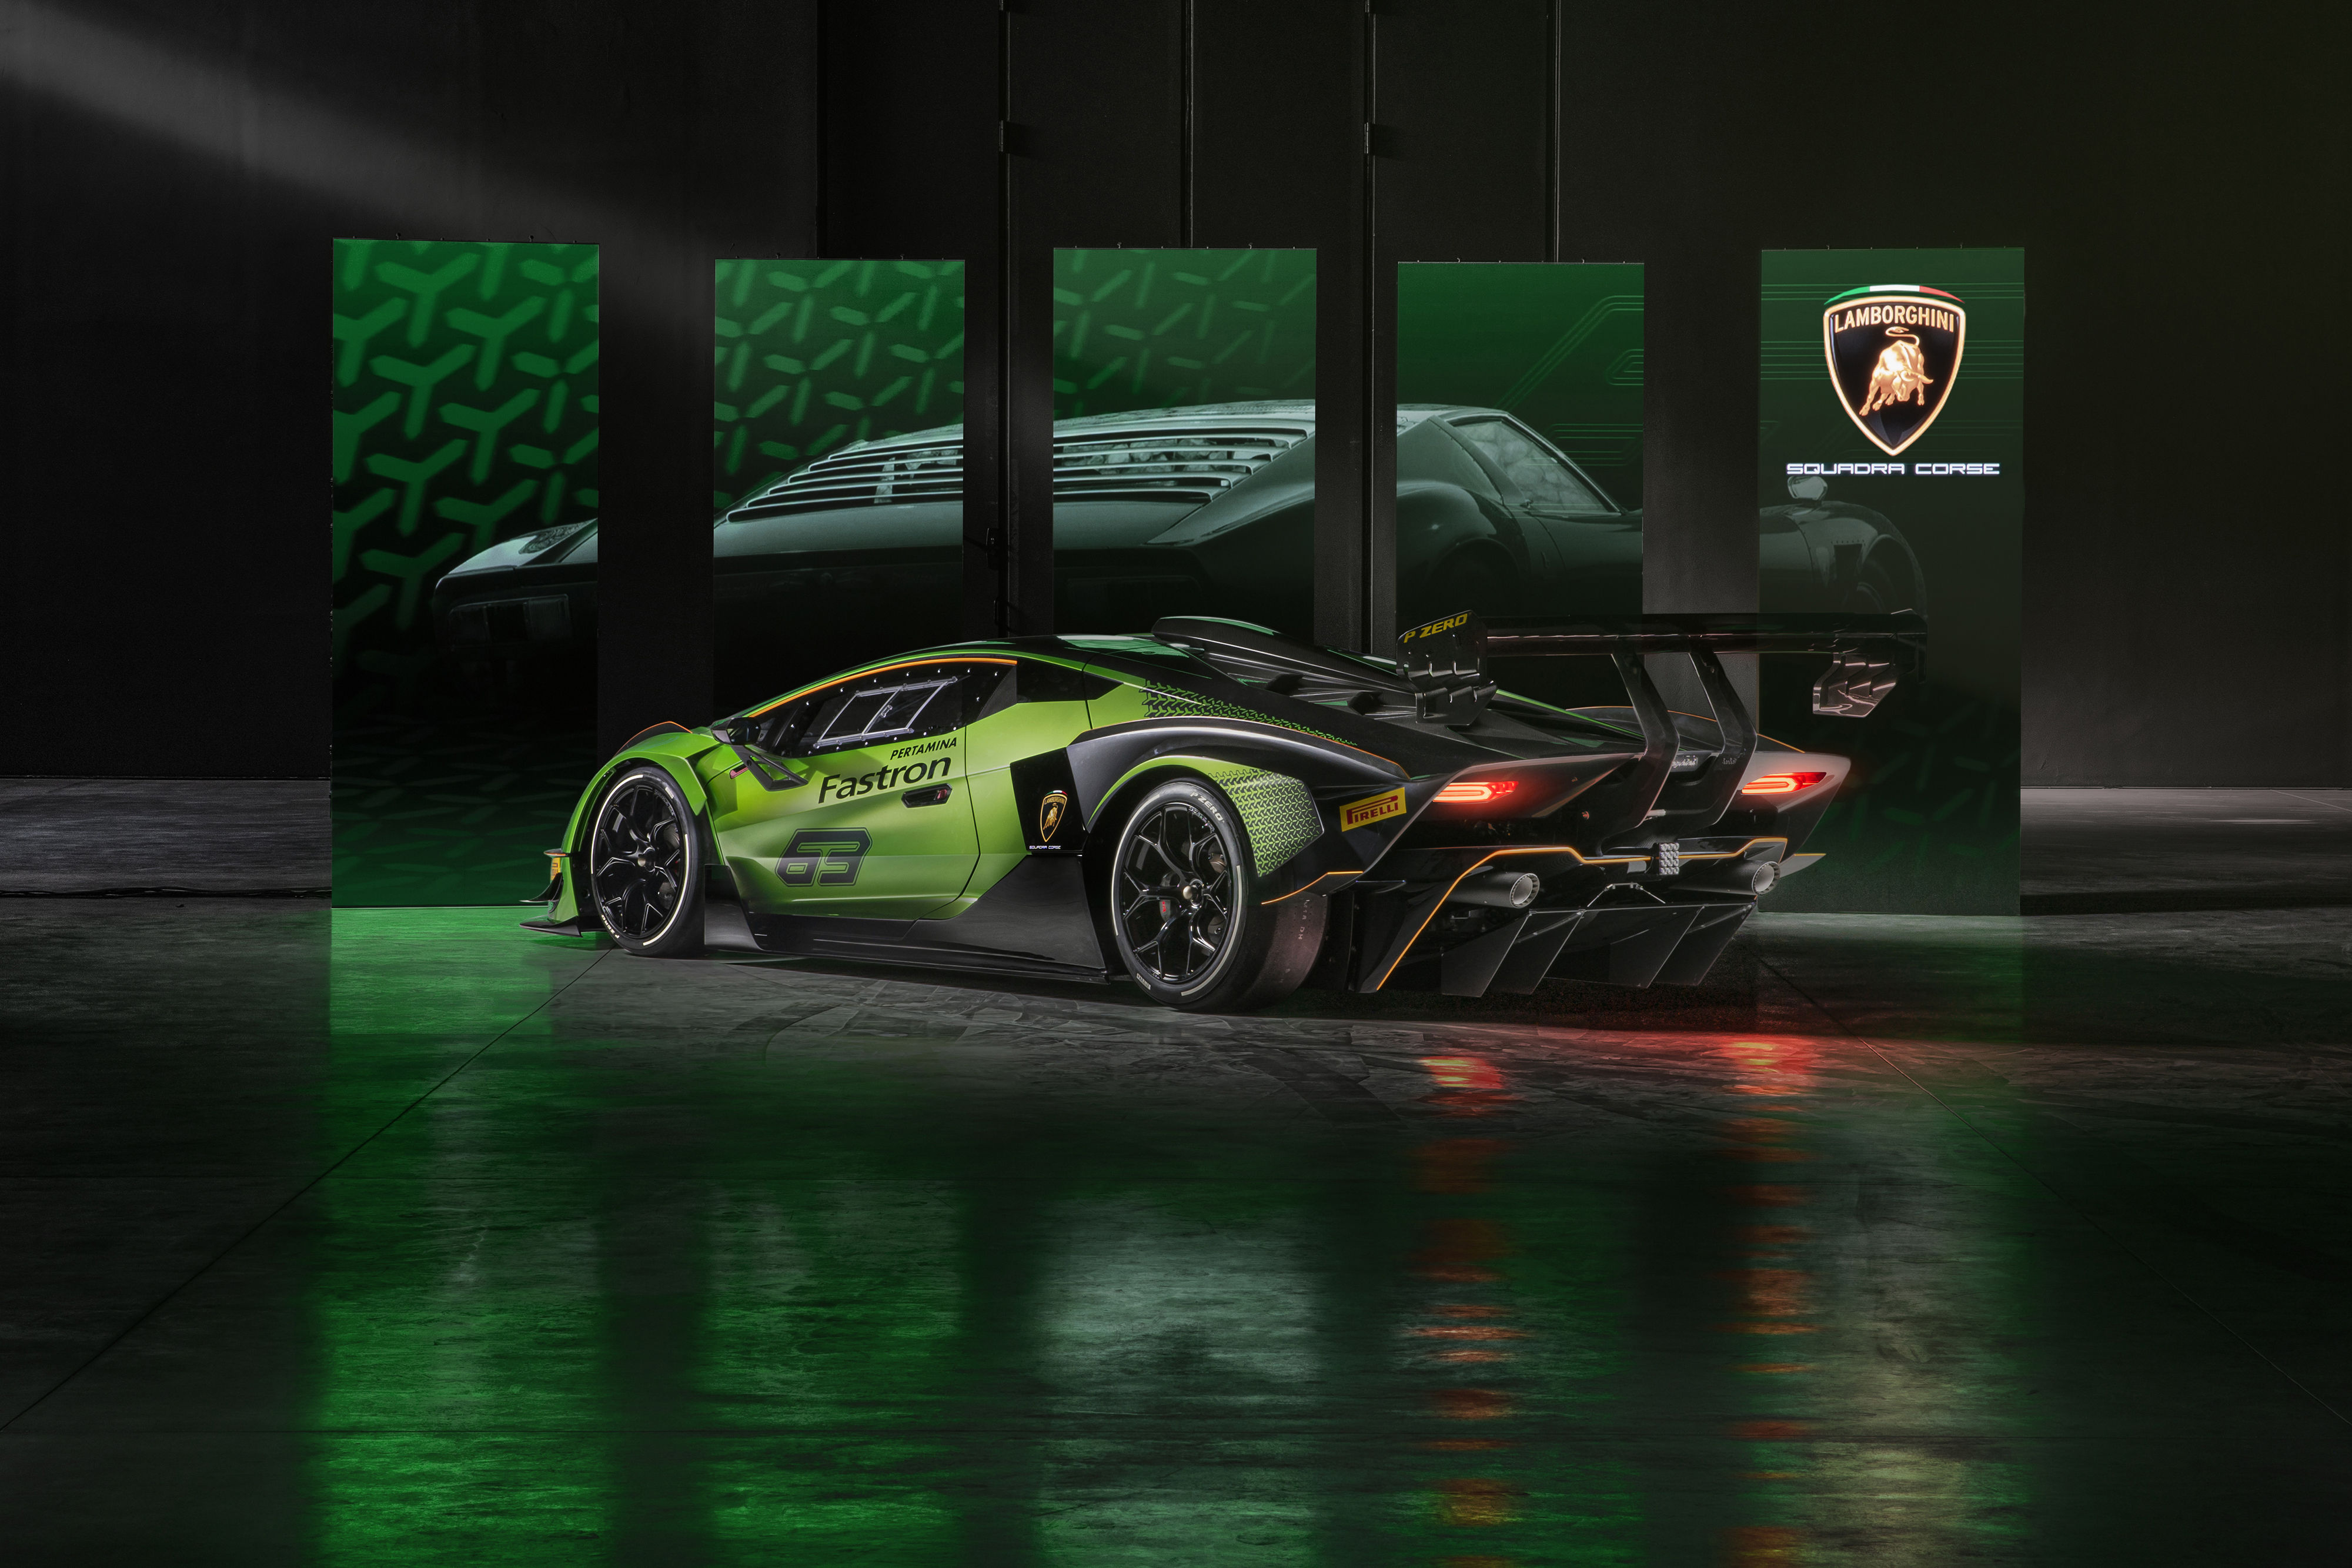 Every element on and in the Lamborghini Essenza SCV12 has been incorporated with its performance capabilities in mind.